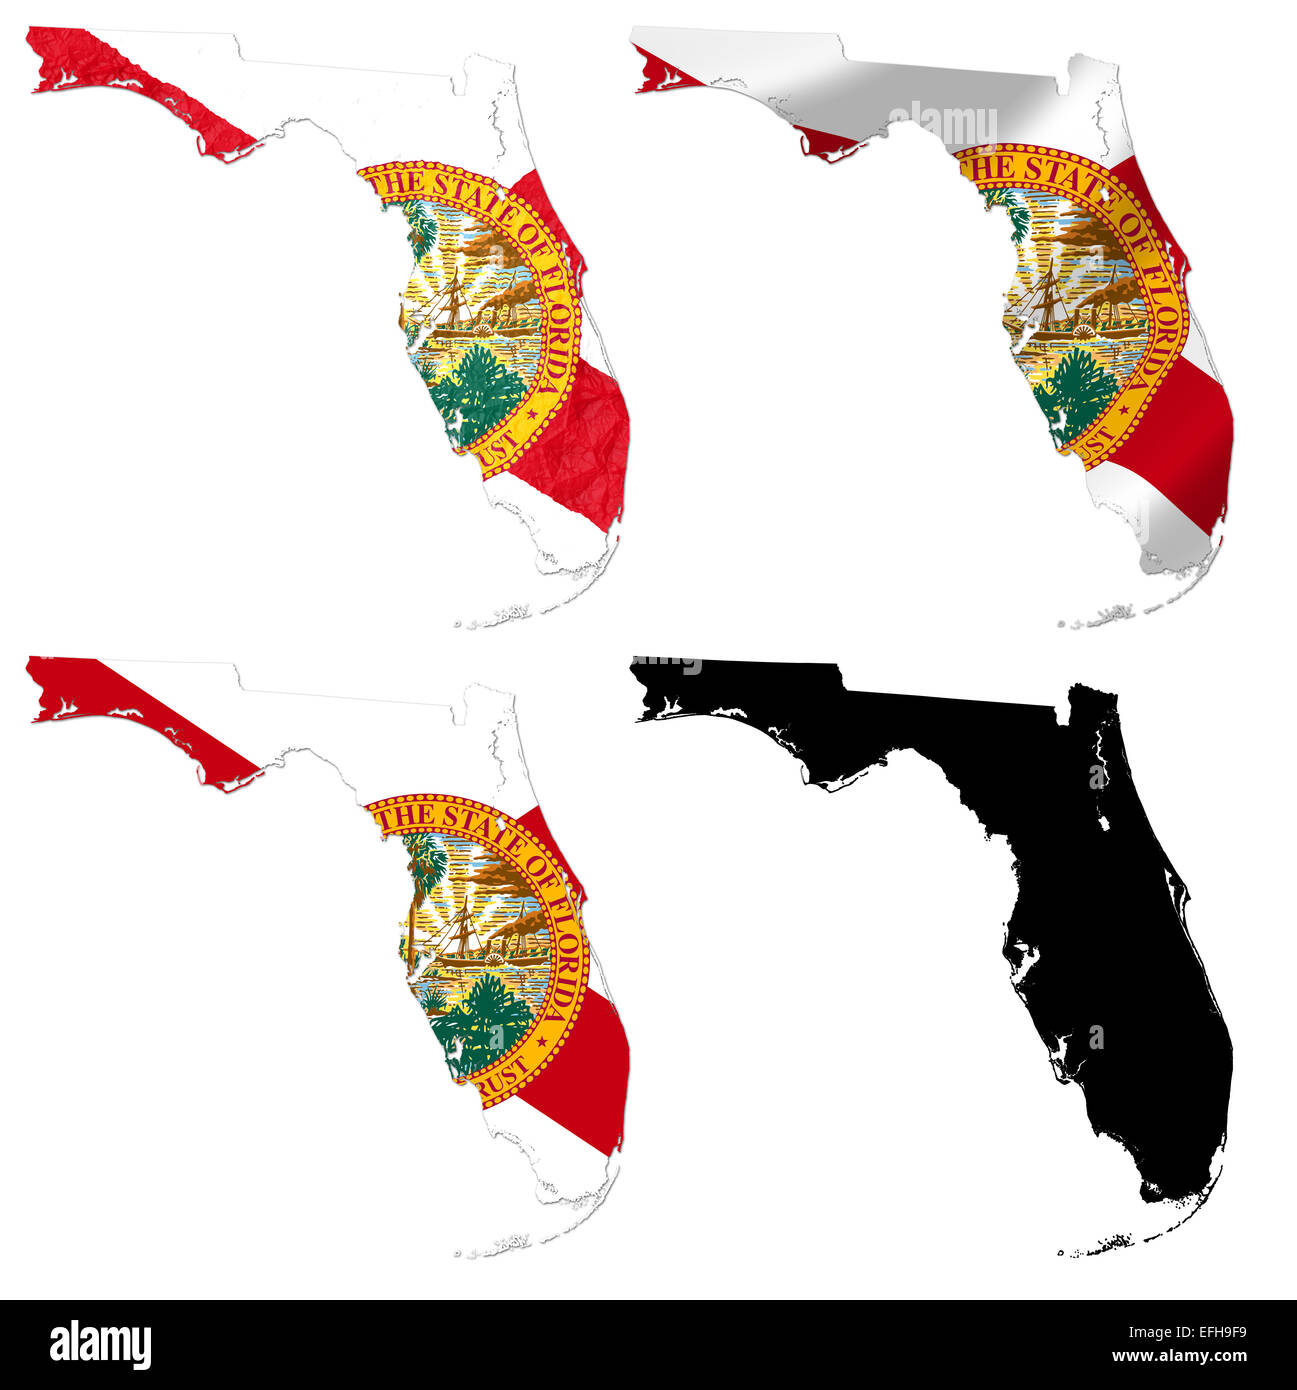 US Florida state flag over map Stock Photo